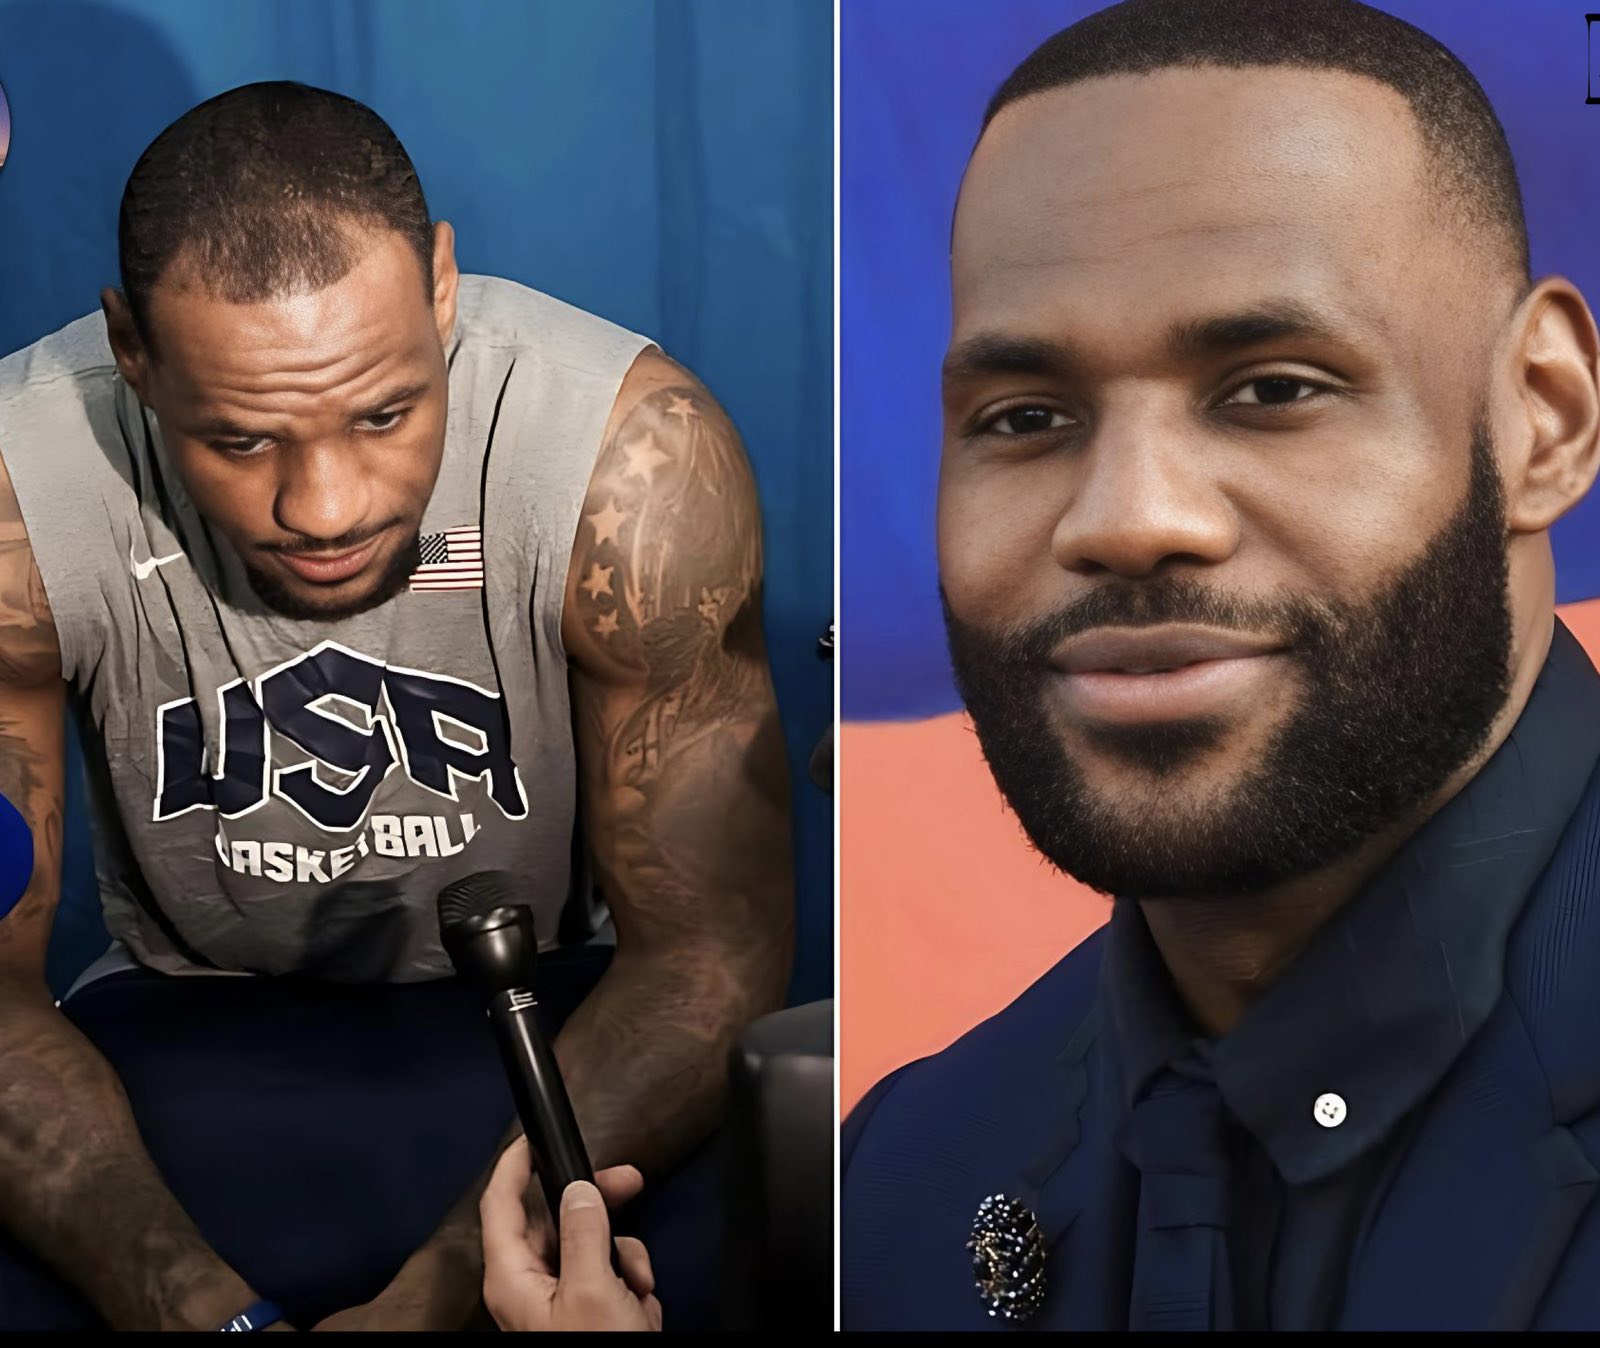 LeBron James Removed from US Team, ‘You’re Woke’